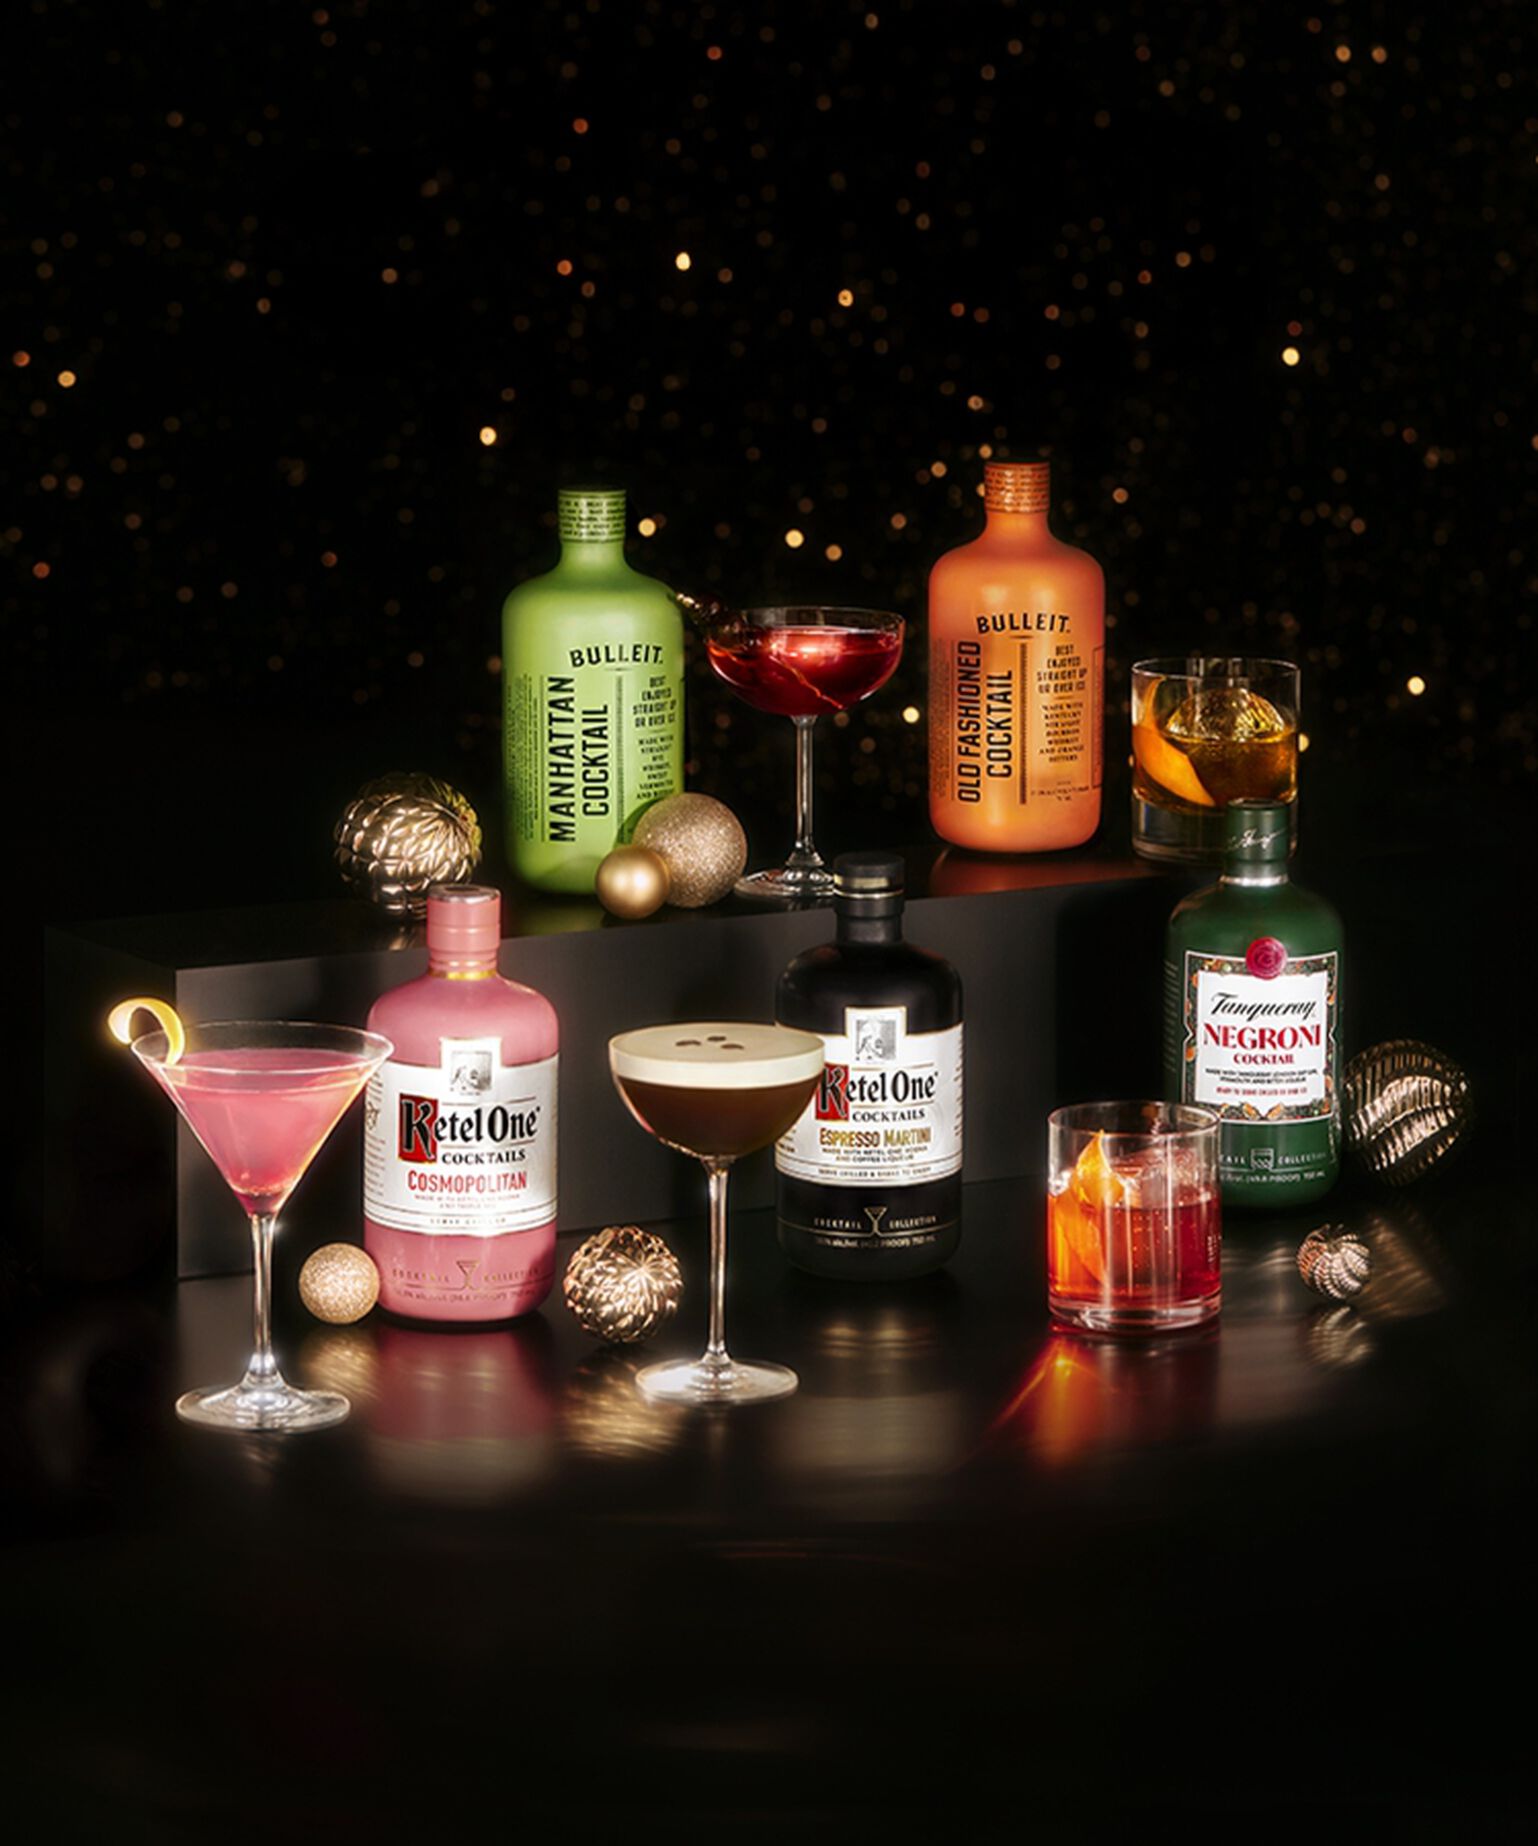 An assortment of ready to drink cocktails